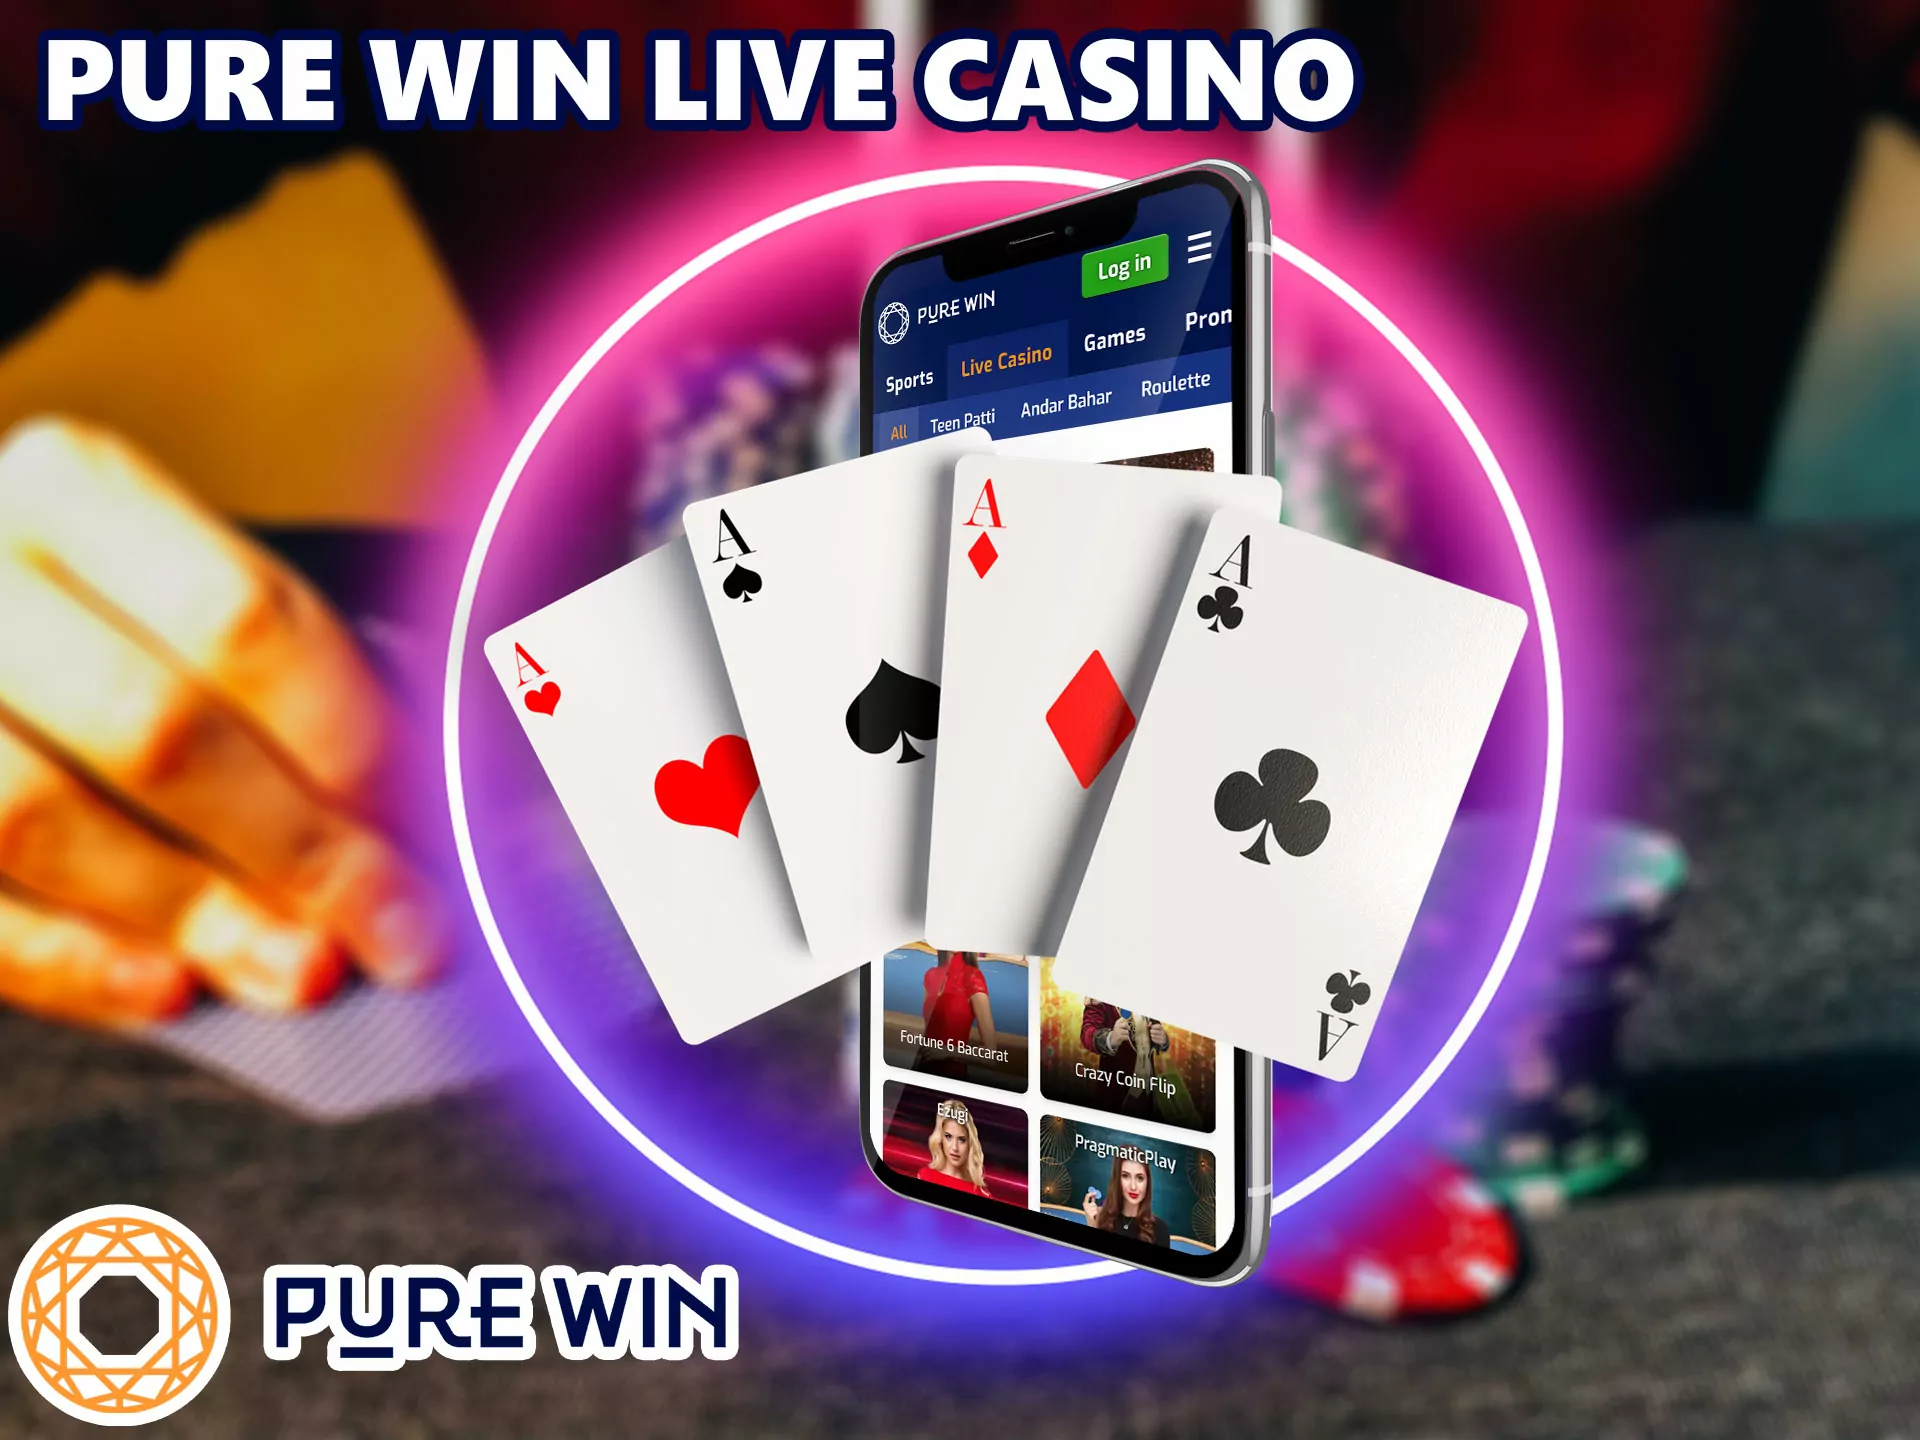 Pure Win live casino is no worse than the classic game, it will not leave you indifferent.